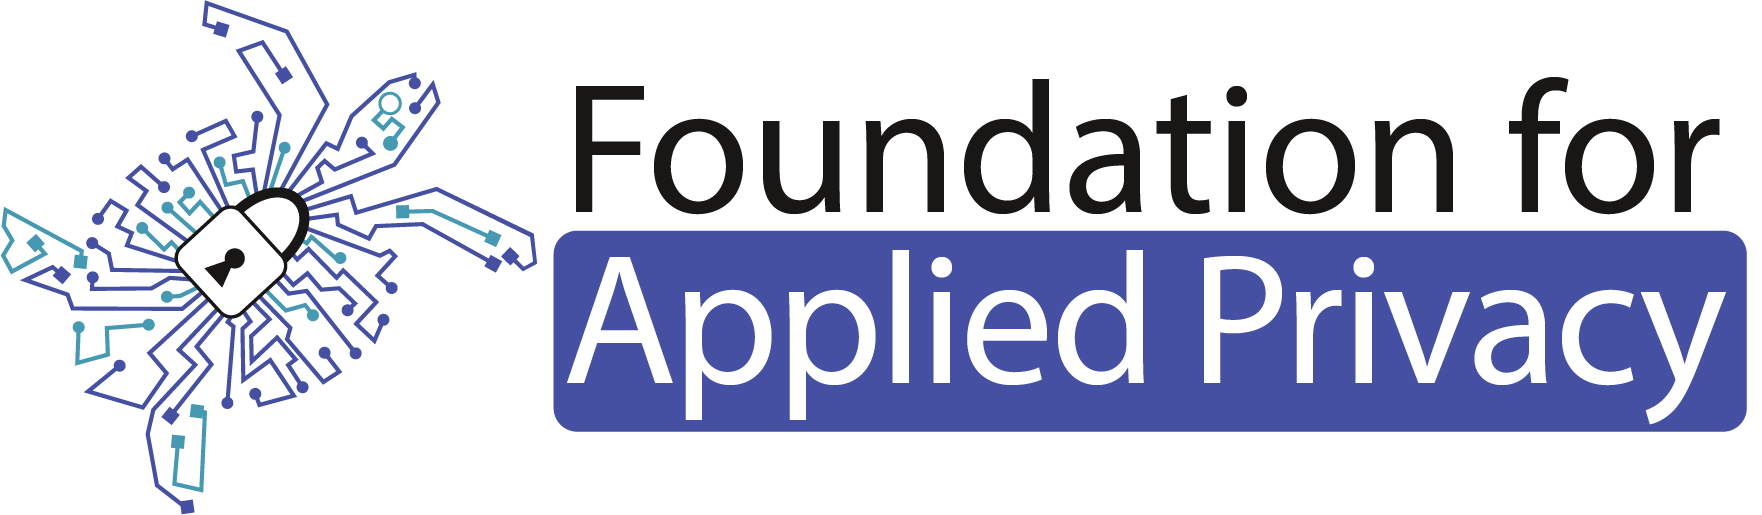 Logo of the Foundation for Applied Privacy